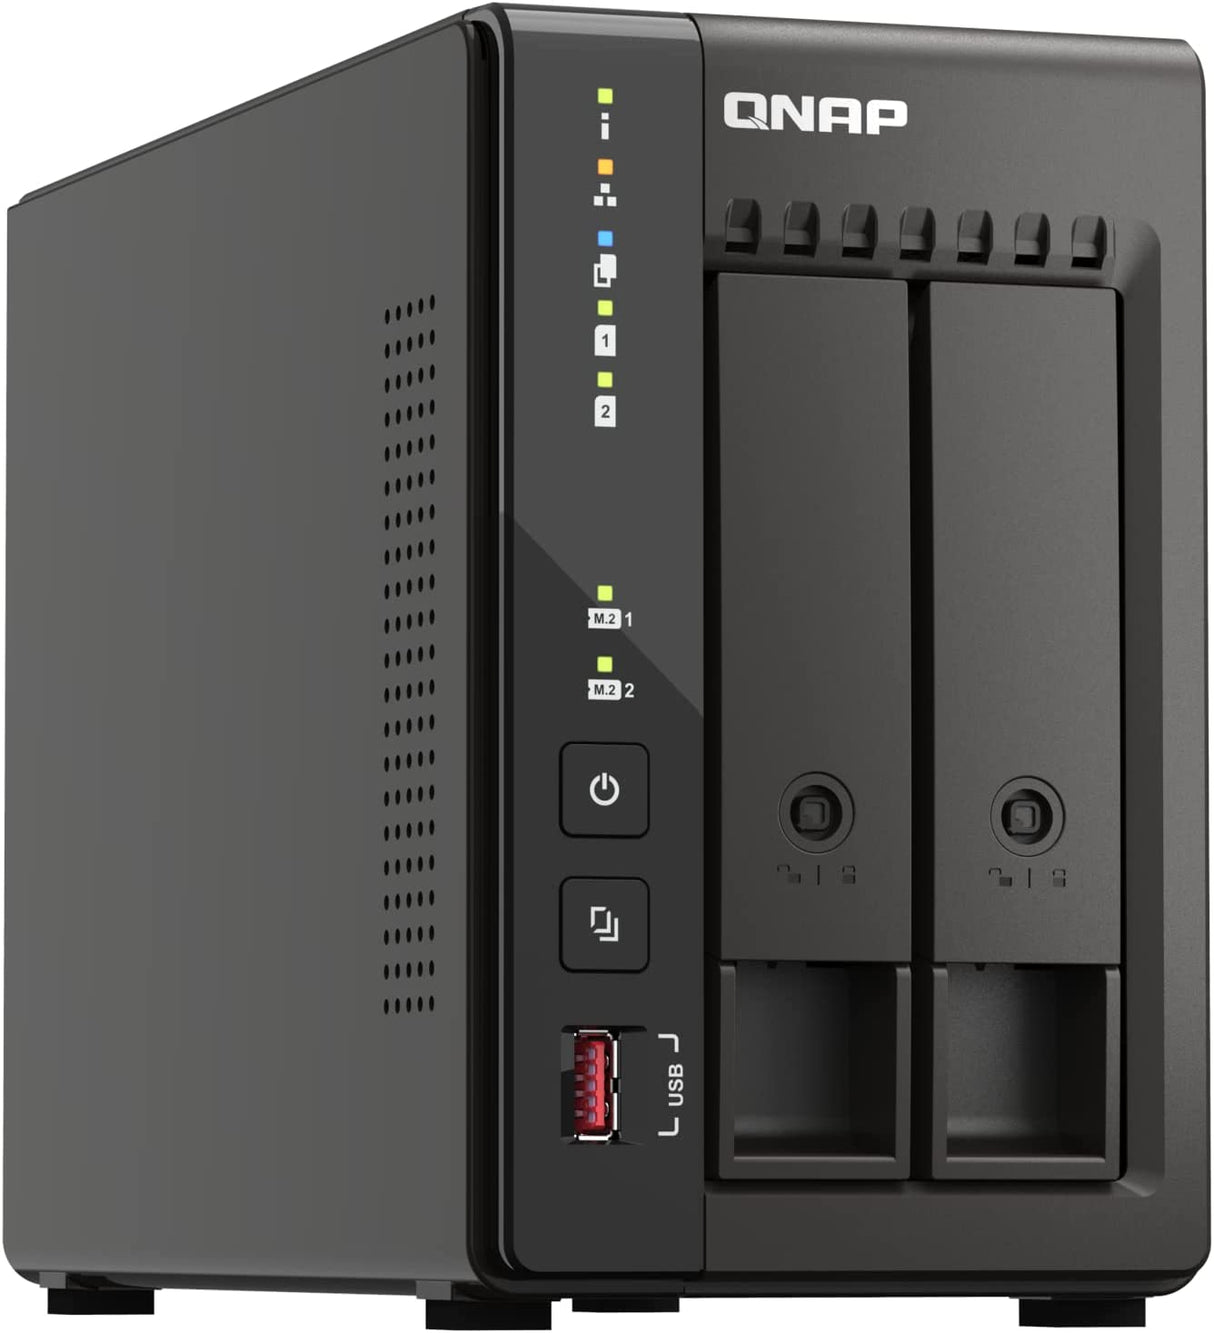 QNAP TS-253E-8G-US 2 Bay High-Performance Desktop NAS with Intel Celeron Quad-core Processor, 8 GB DDR4 RAM and Dual 2.5GbE (2.5G/1G/100M) Network Connectivity (Diskless)